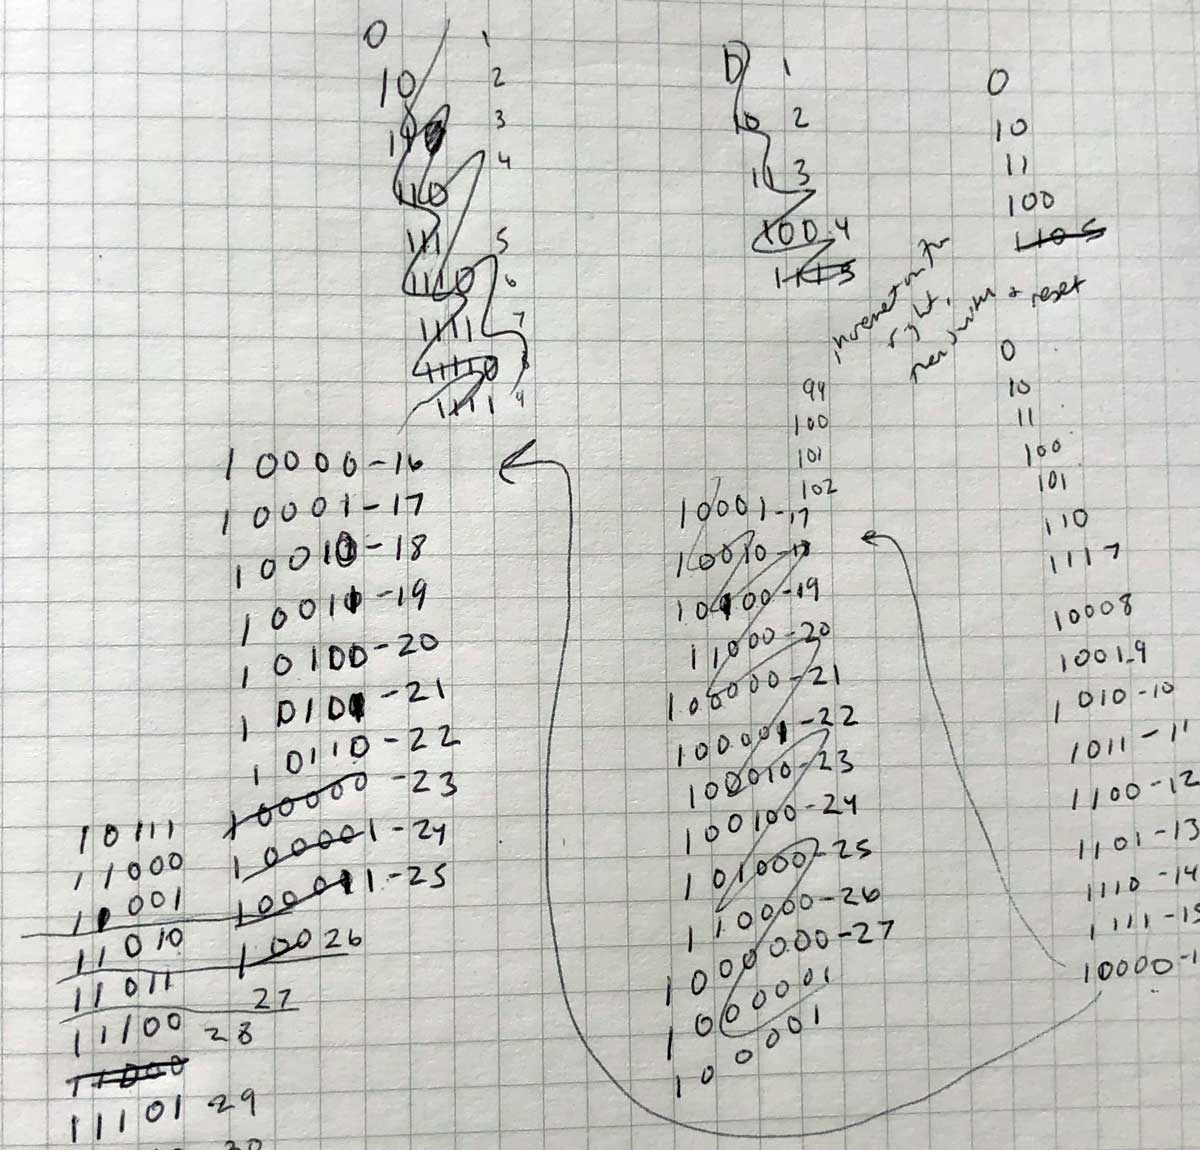 A notebook pad showing binary counting and mistakes